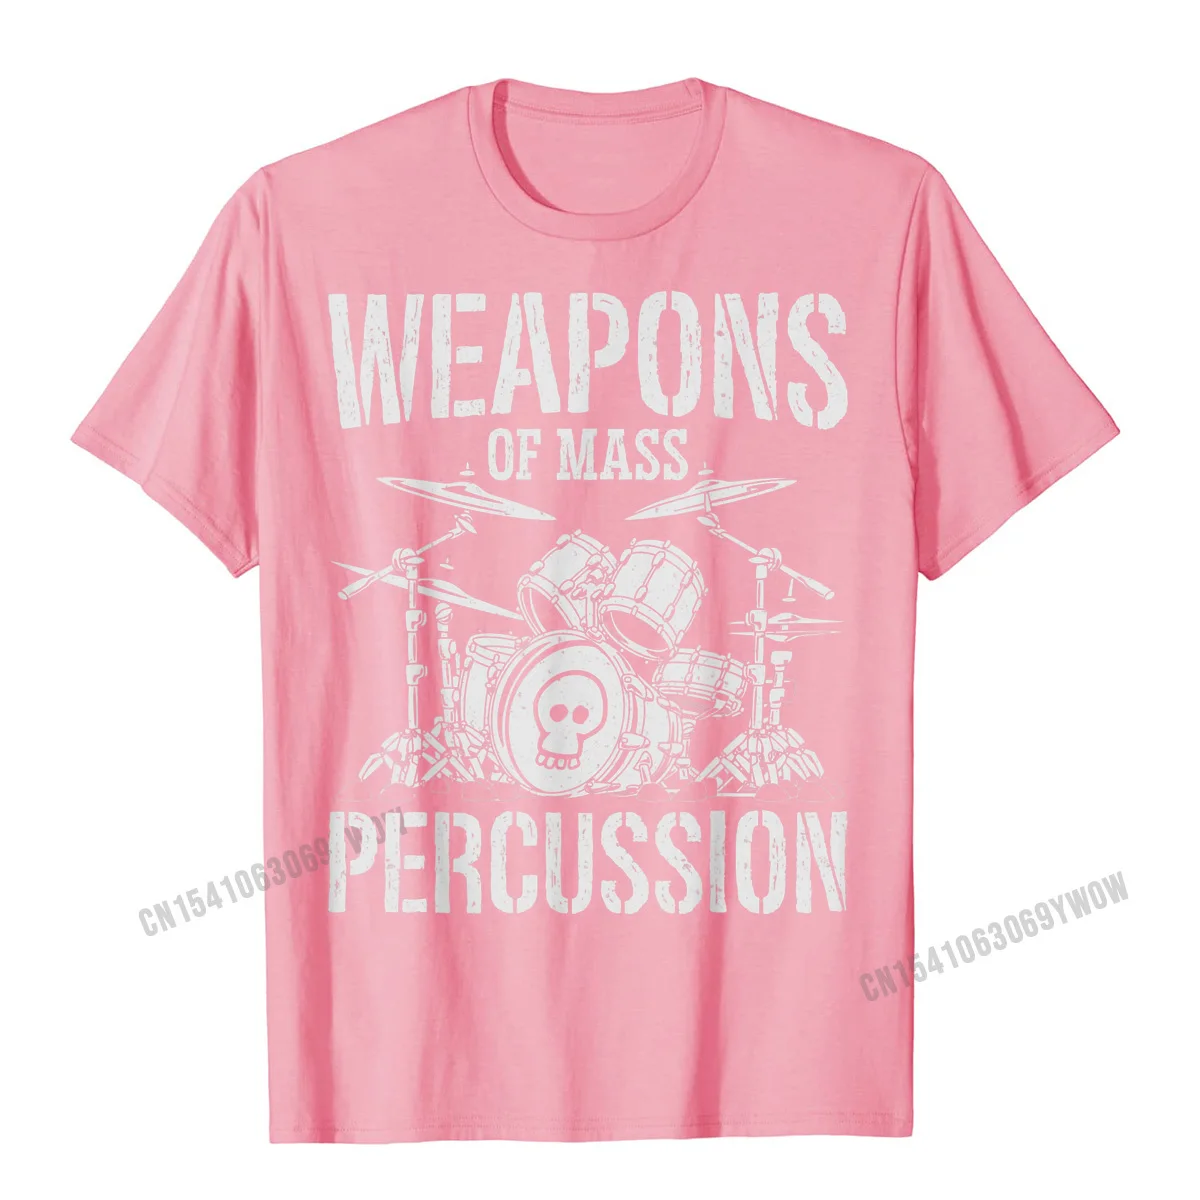 Printed Tshirts Short Sleeve Design Wholesale Man VALENTINE DAY Tops Shirts Design Tee Shirts Crewneck Pure Cotton Weapons Of Mass Percussion Funny Drummer Drumset Drum Set T-Shirt__94 pink